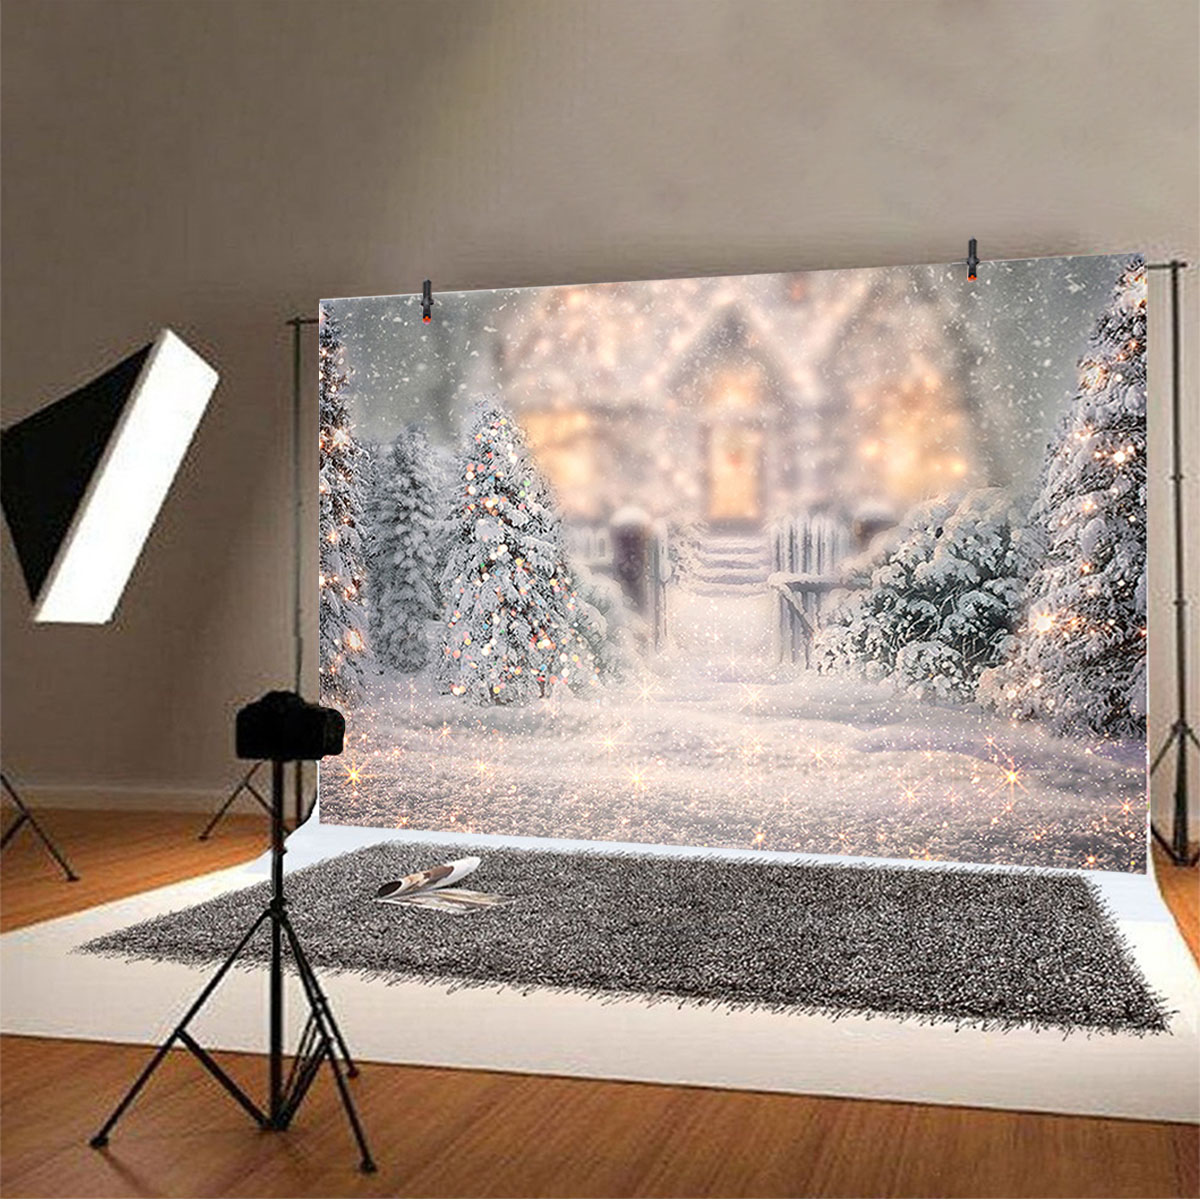 5x3FT-7x5FT-8x6FT-Christmas-Tree-Snow-Photography-Backdrop-Background-Studio-Prop-1609479-3